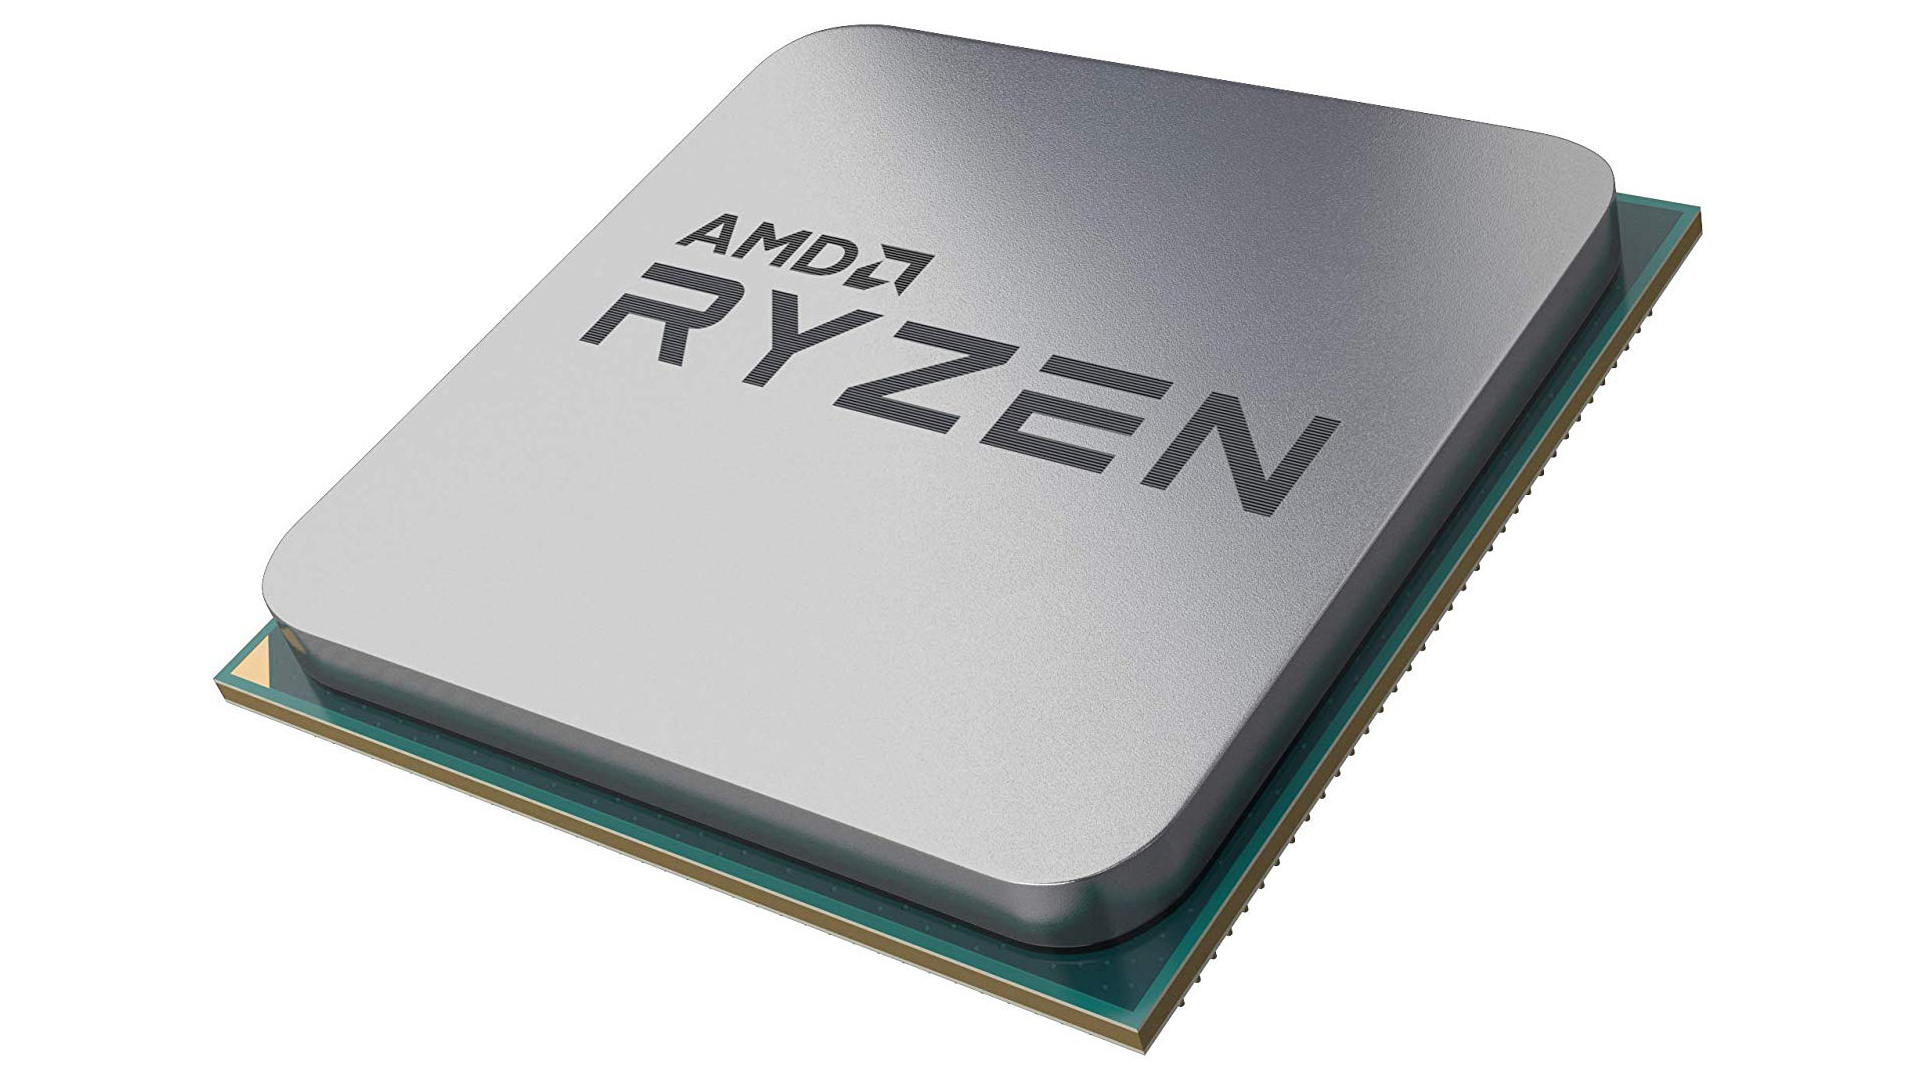 AMD's Ryzen 5 3600 Six-Core CPU Hits Its Lowest Ever Price at $175